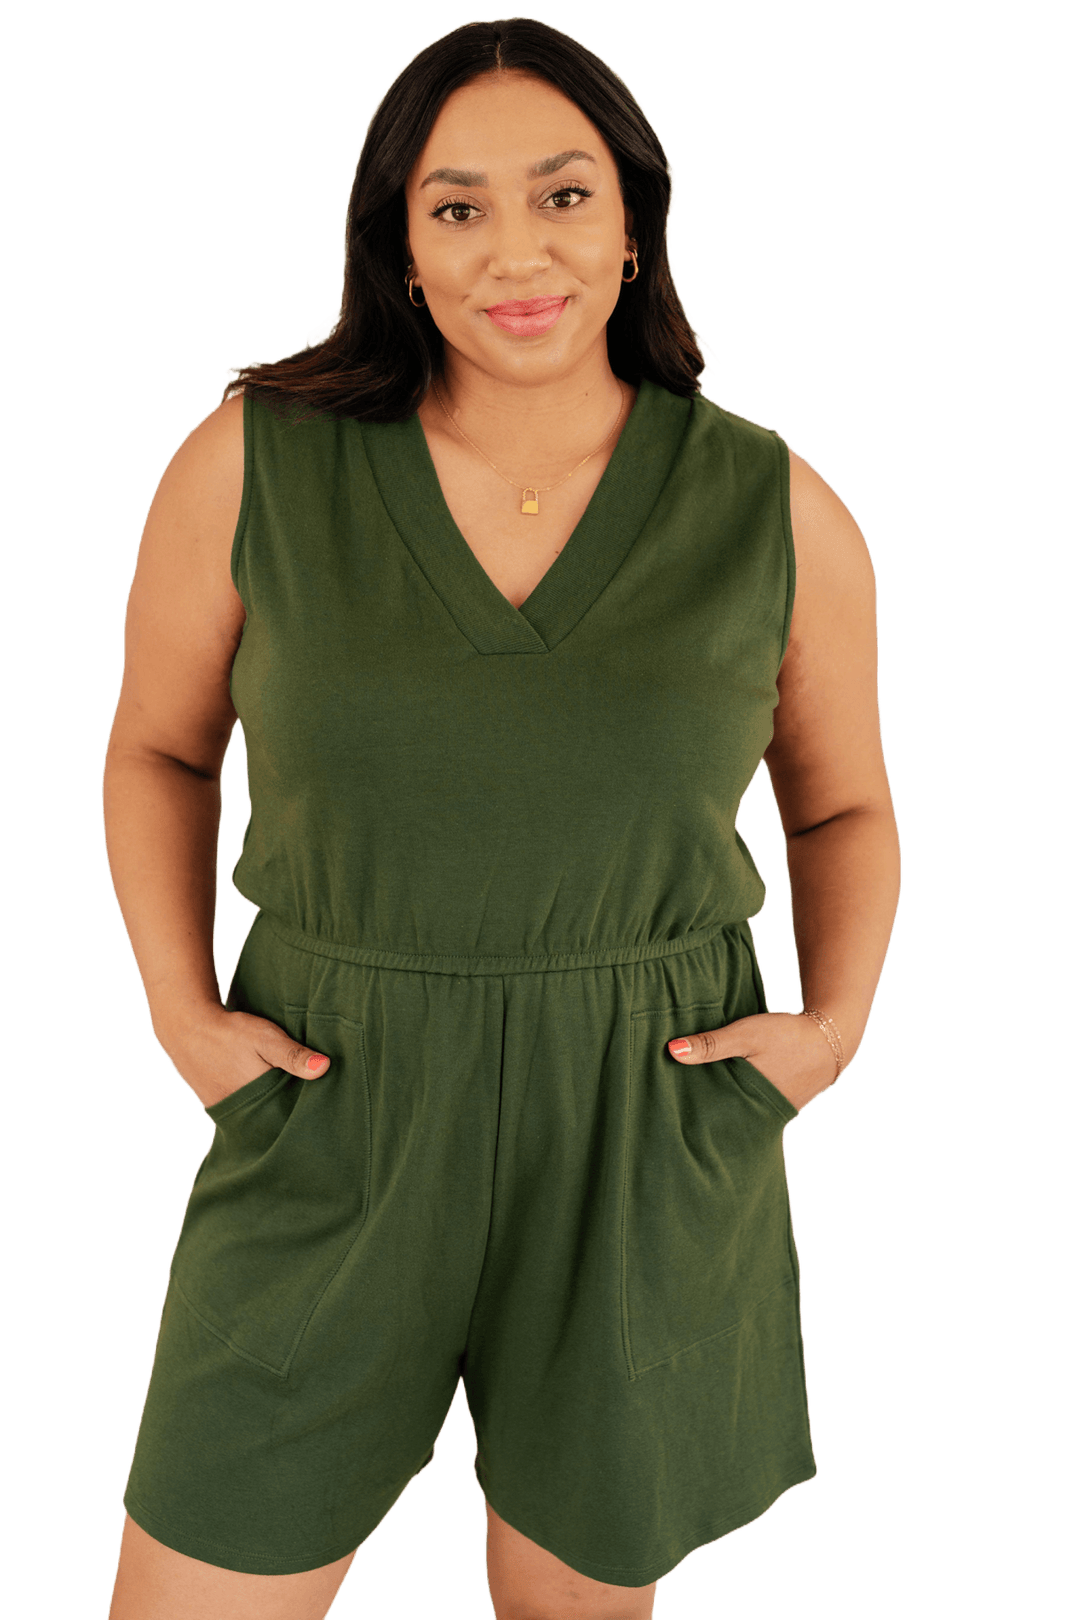 Sleeveless V-Neck Romper in Army Green Green Rompers